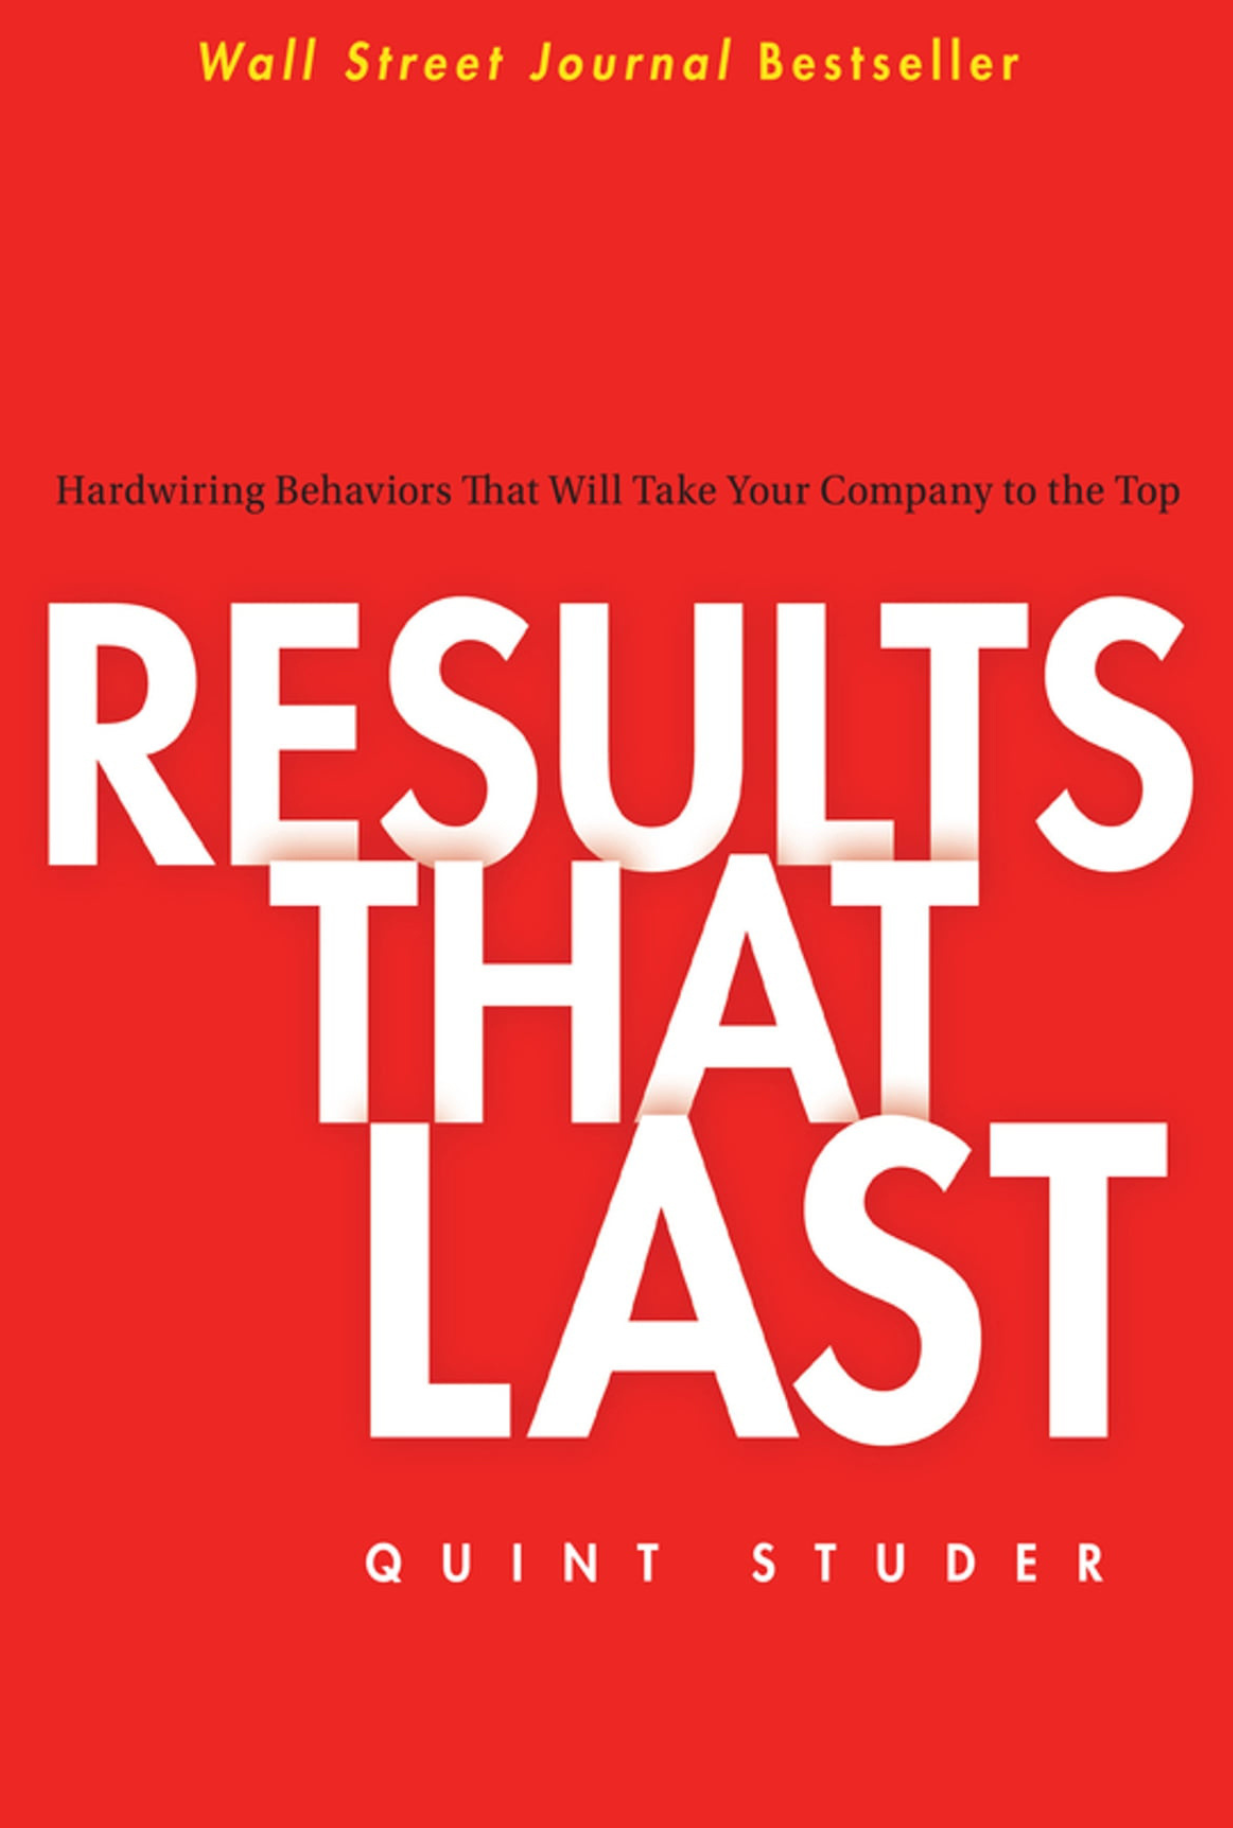 Results that Last by Quint Studer